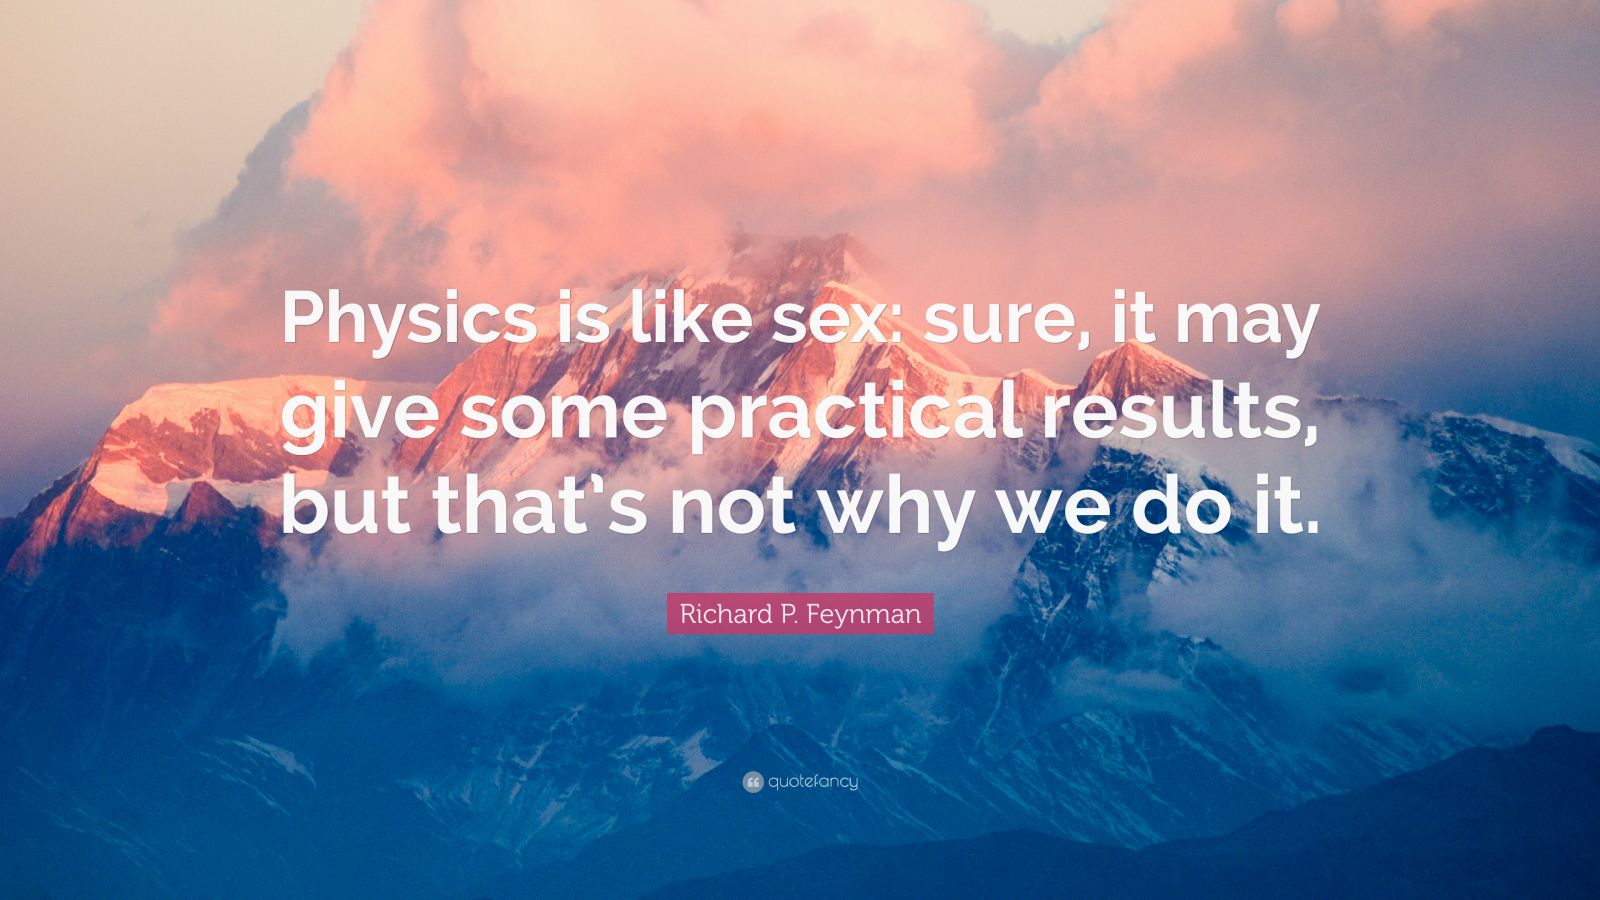 Theoretical physics like sex, but with no need to experiment